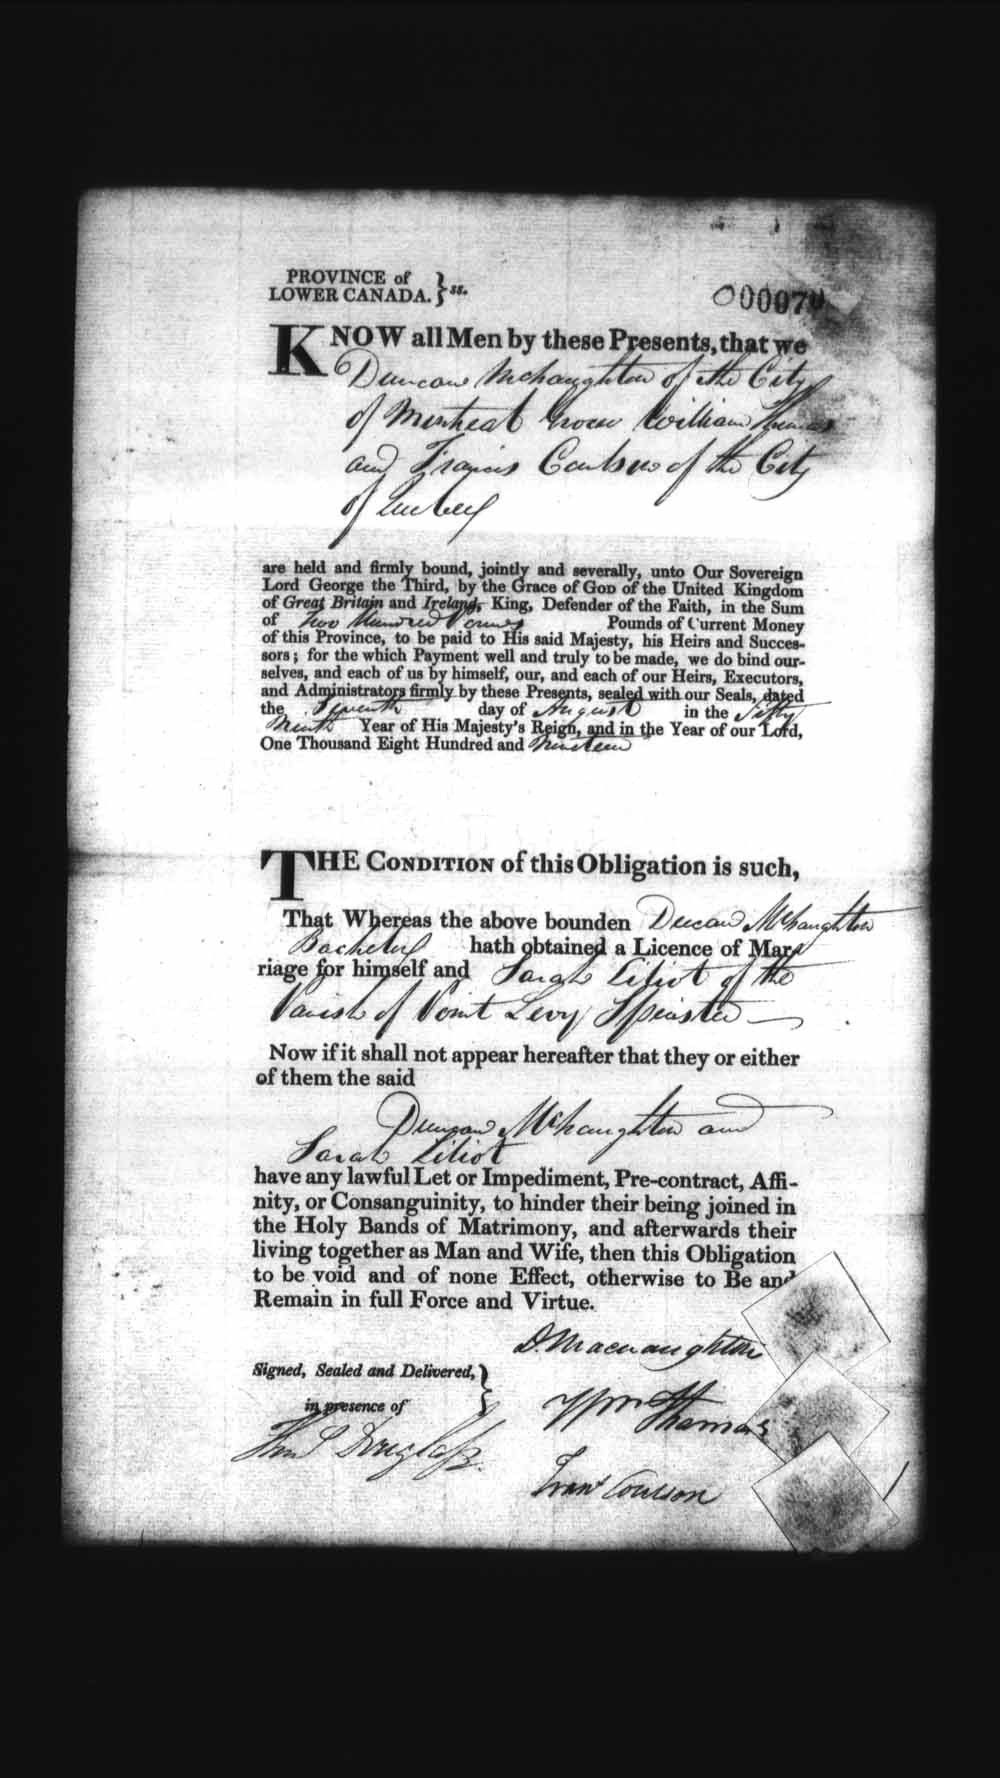 Digitized page of Upper and Lower Canada Marriage Bonds (1779-1865) for Image No.: e008235894